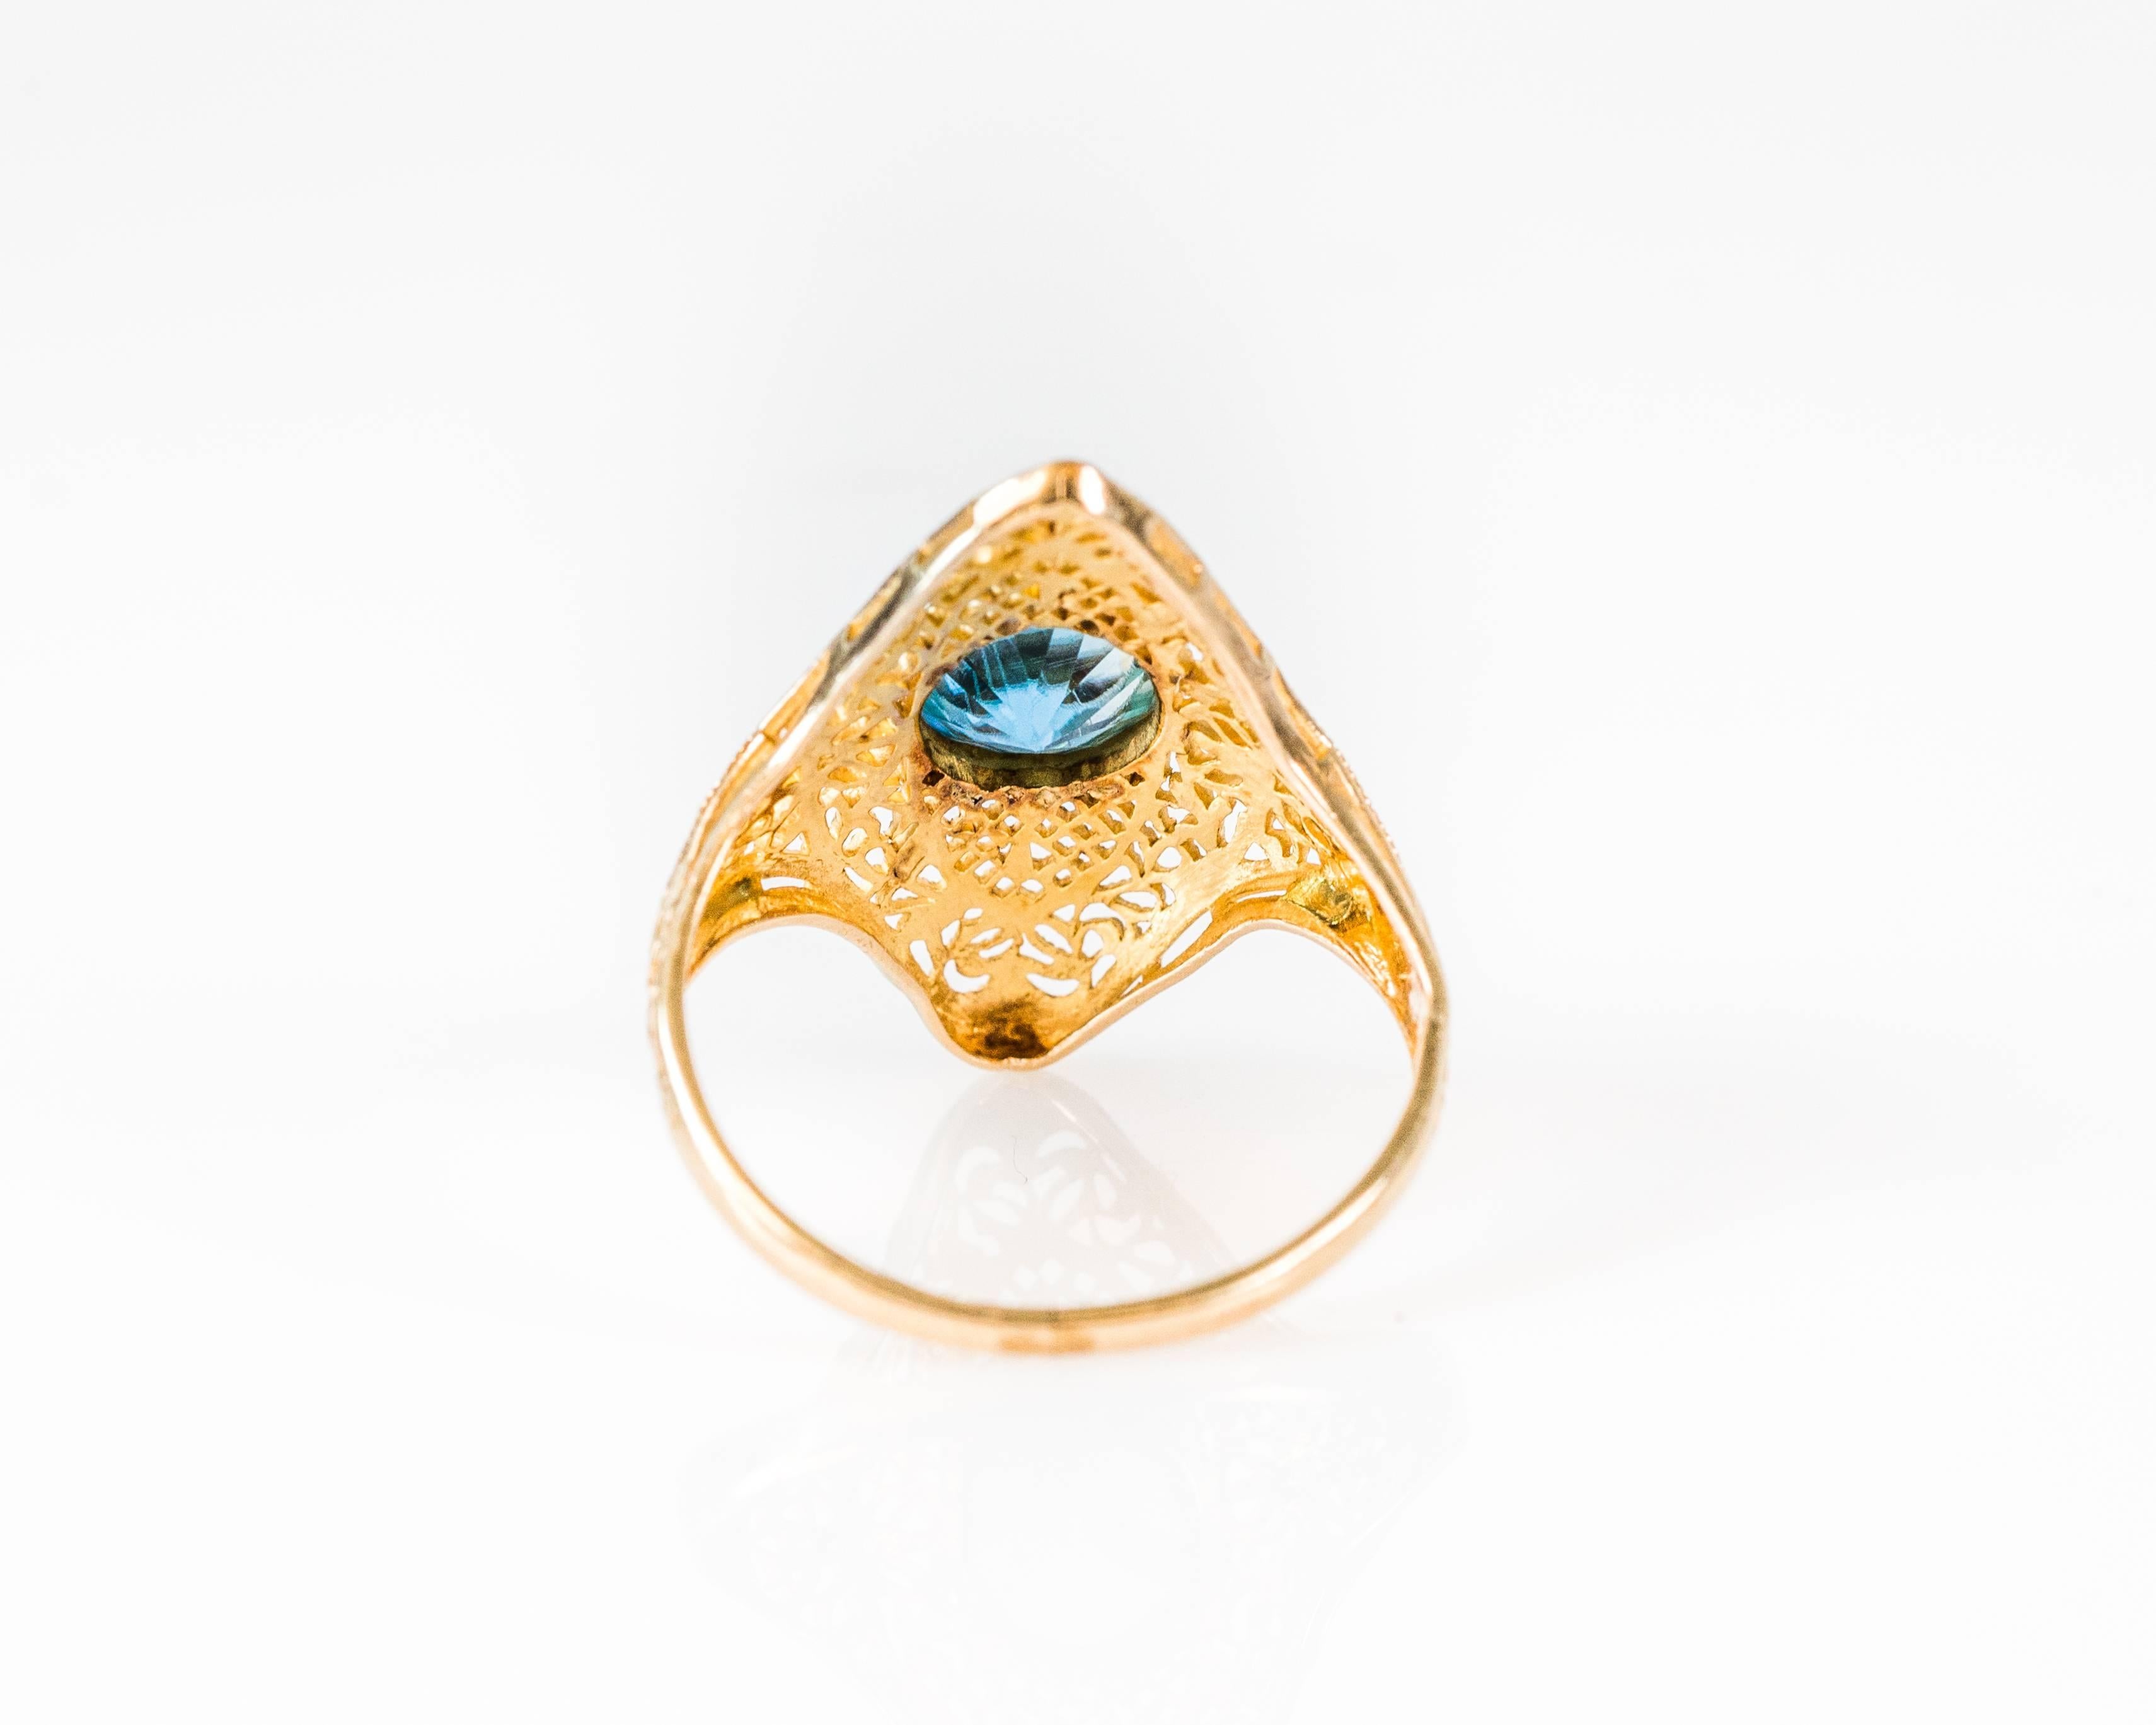 Marquise Cut 1.25 Carat Blue Zircon and 14K Gold Filigree Ring